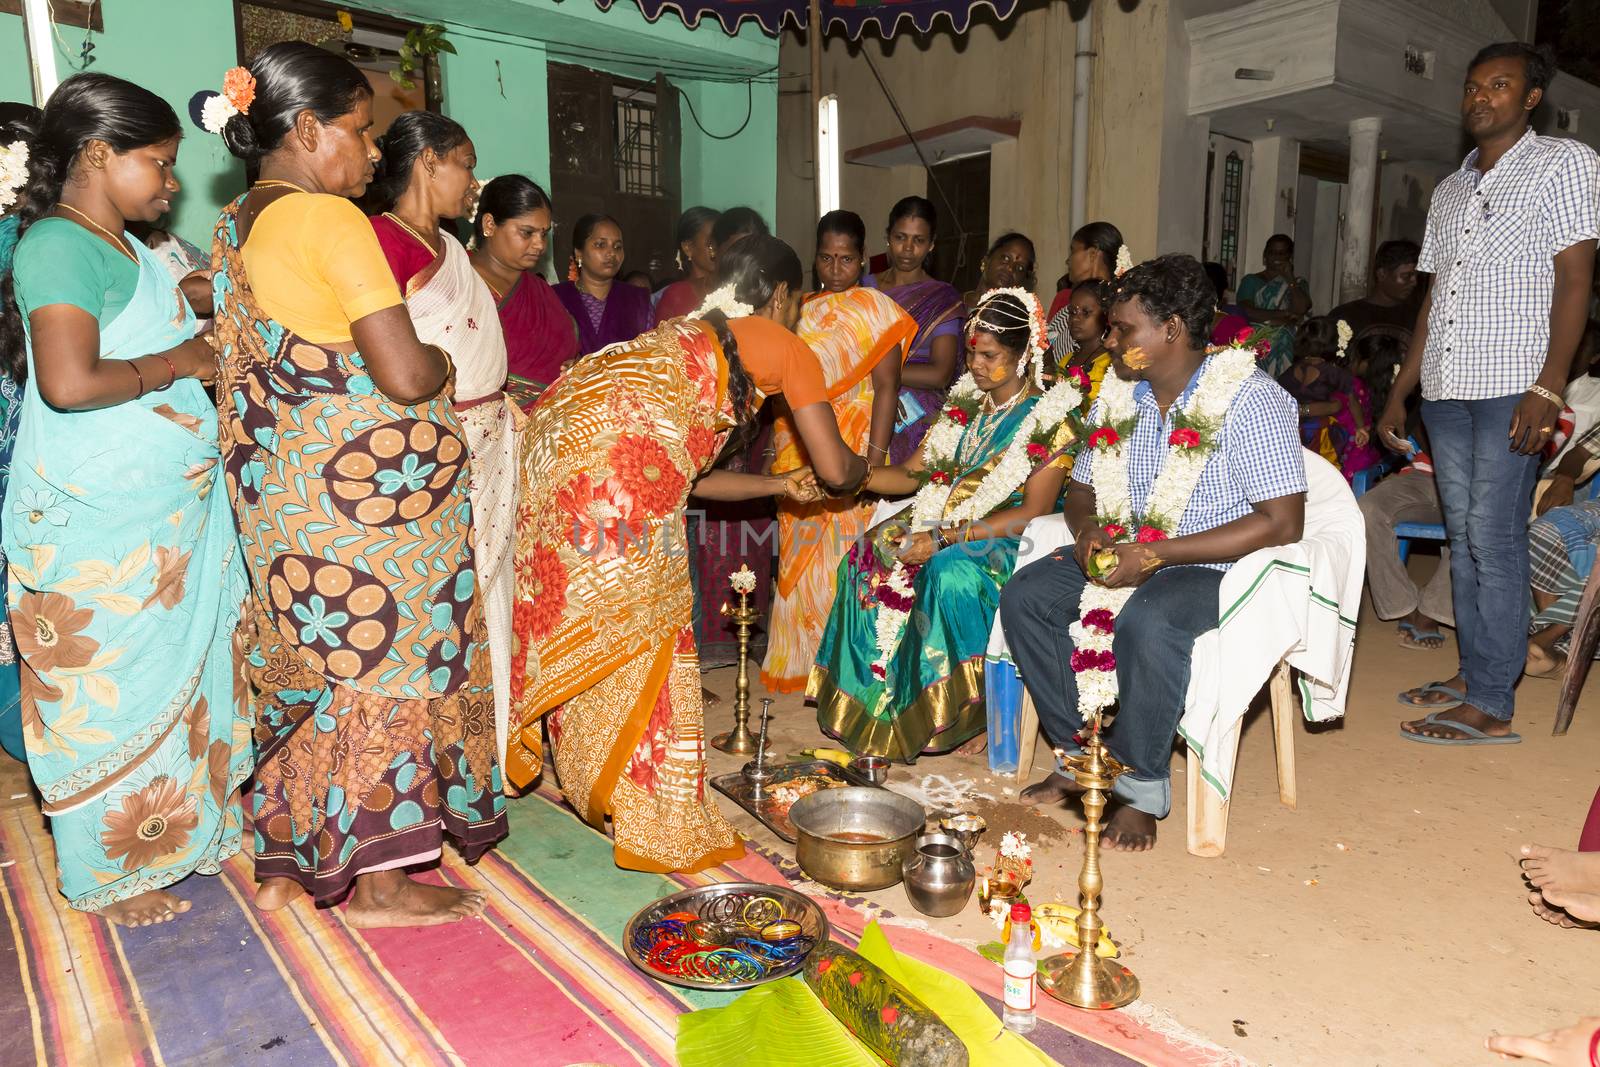 Pondicherry, Tamil Nadu, India - May 11, 2014 : Once month before birth of the baby, families celebrate the soon birth, with village people, offerings, ceremony, gifts